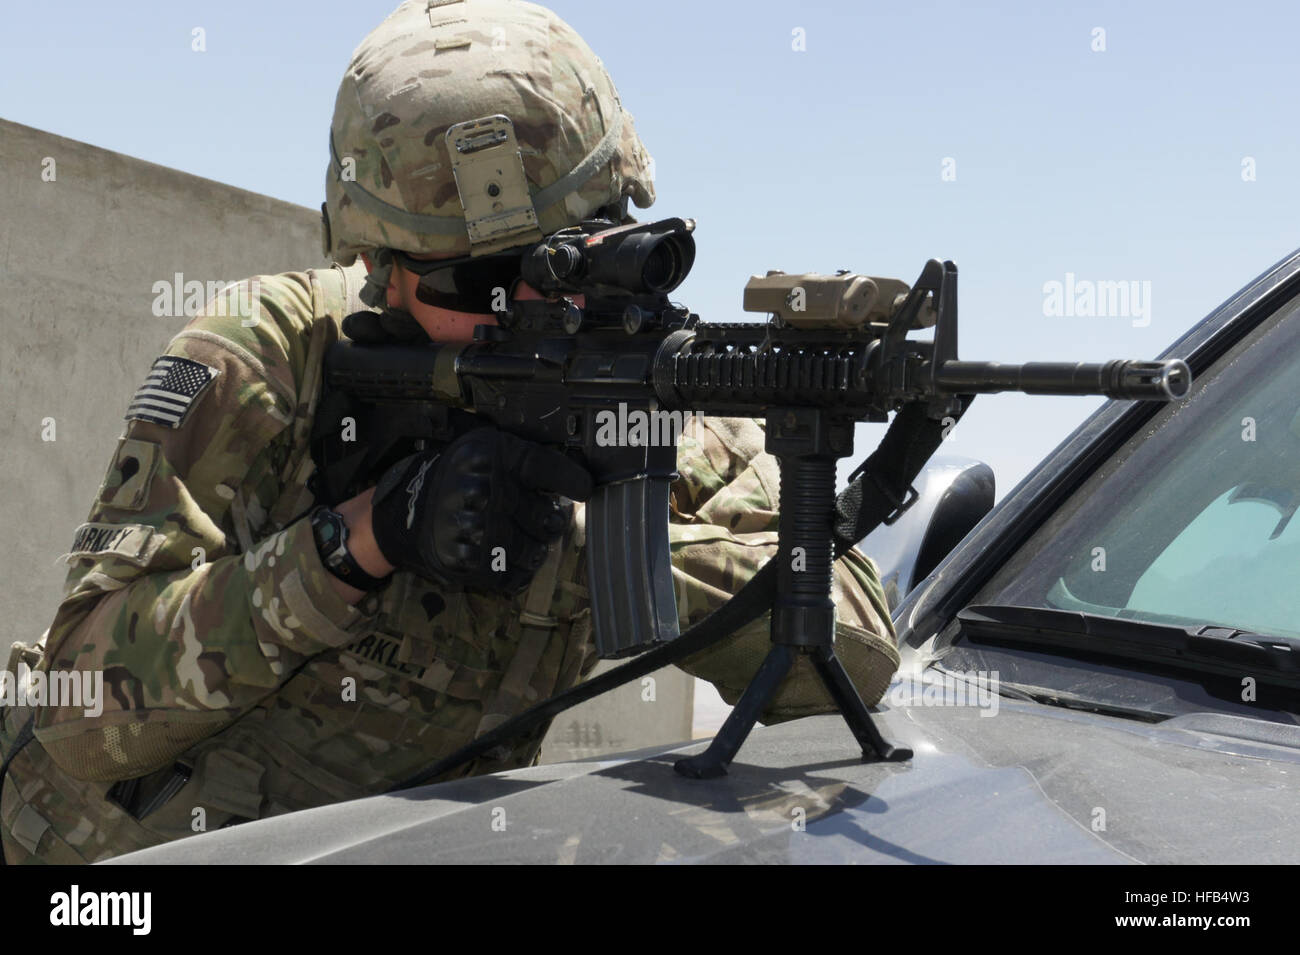 Spc. Leonard Markley scans the horizon for threats serving in a security detail during a press visit at Kabul Military Training Compound in Kabul. (Official U.S. Navy photo by Lt. Russell Wolfkiel) 110514-N-JH188-034 (5722142596) Stock Photo